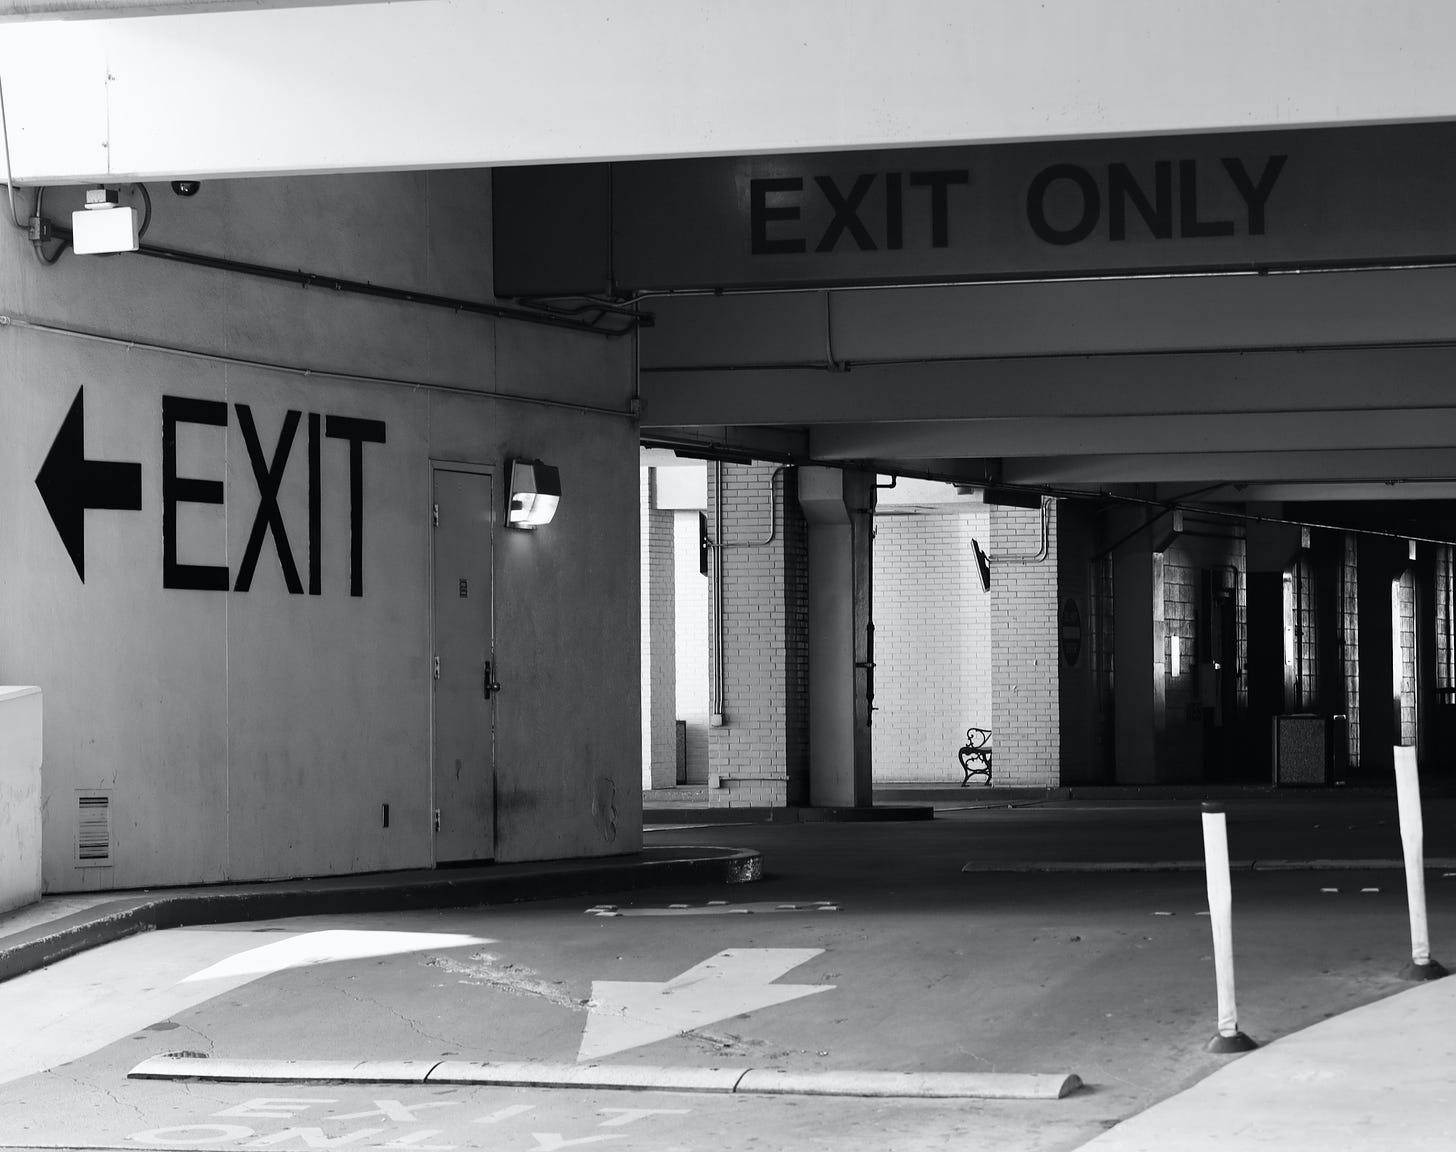 A grayscale photo of a car park, showing exit signs prominently.